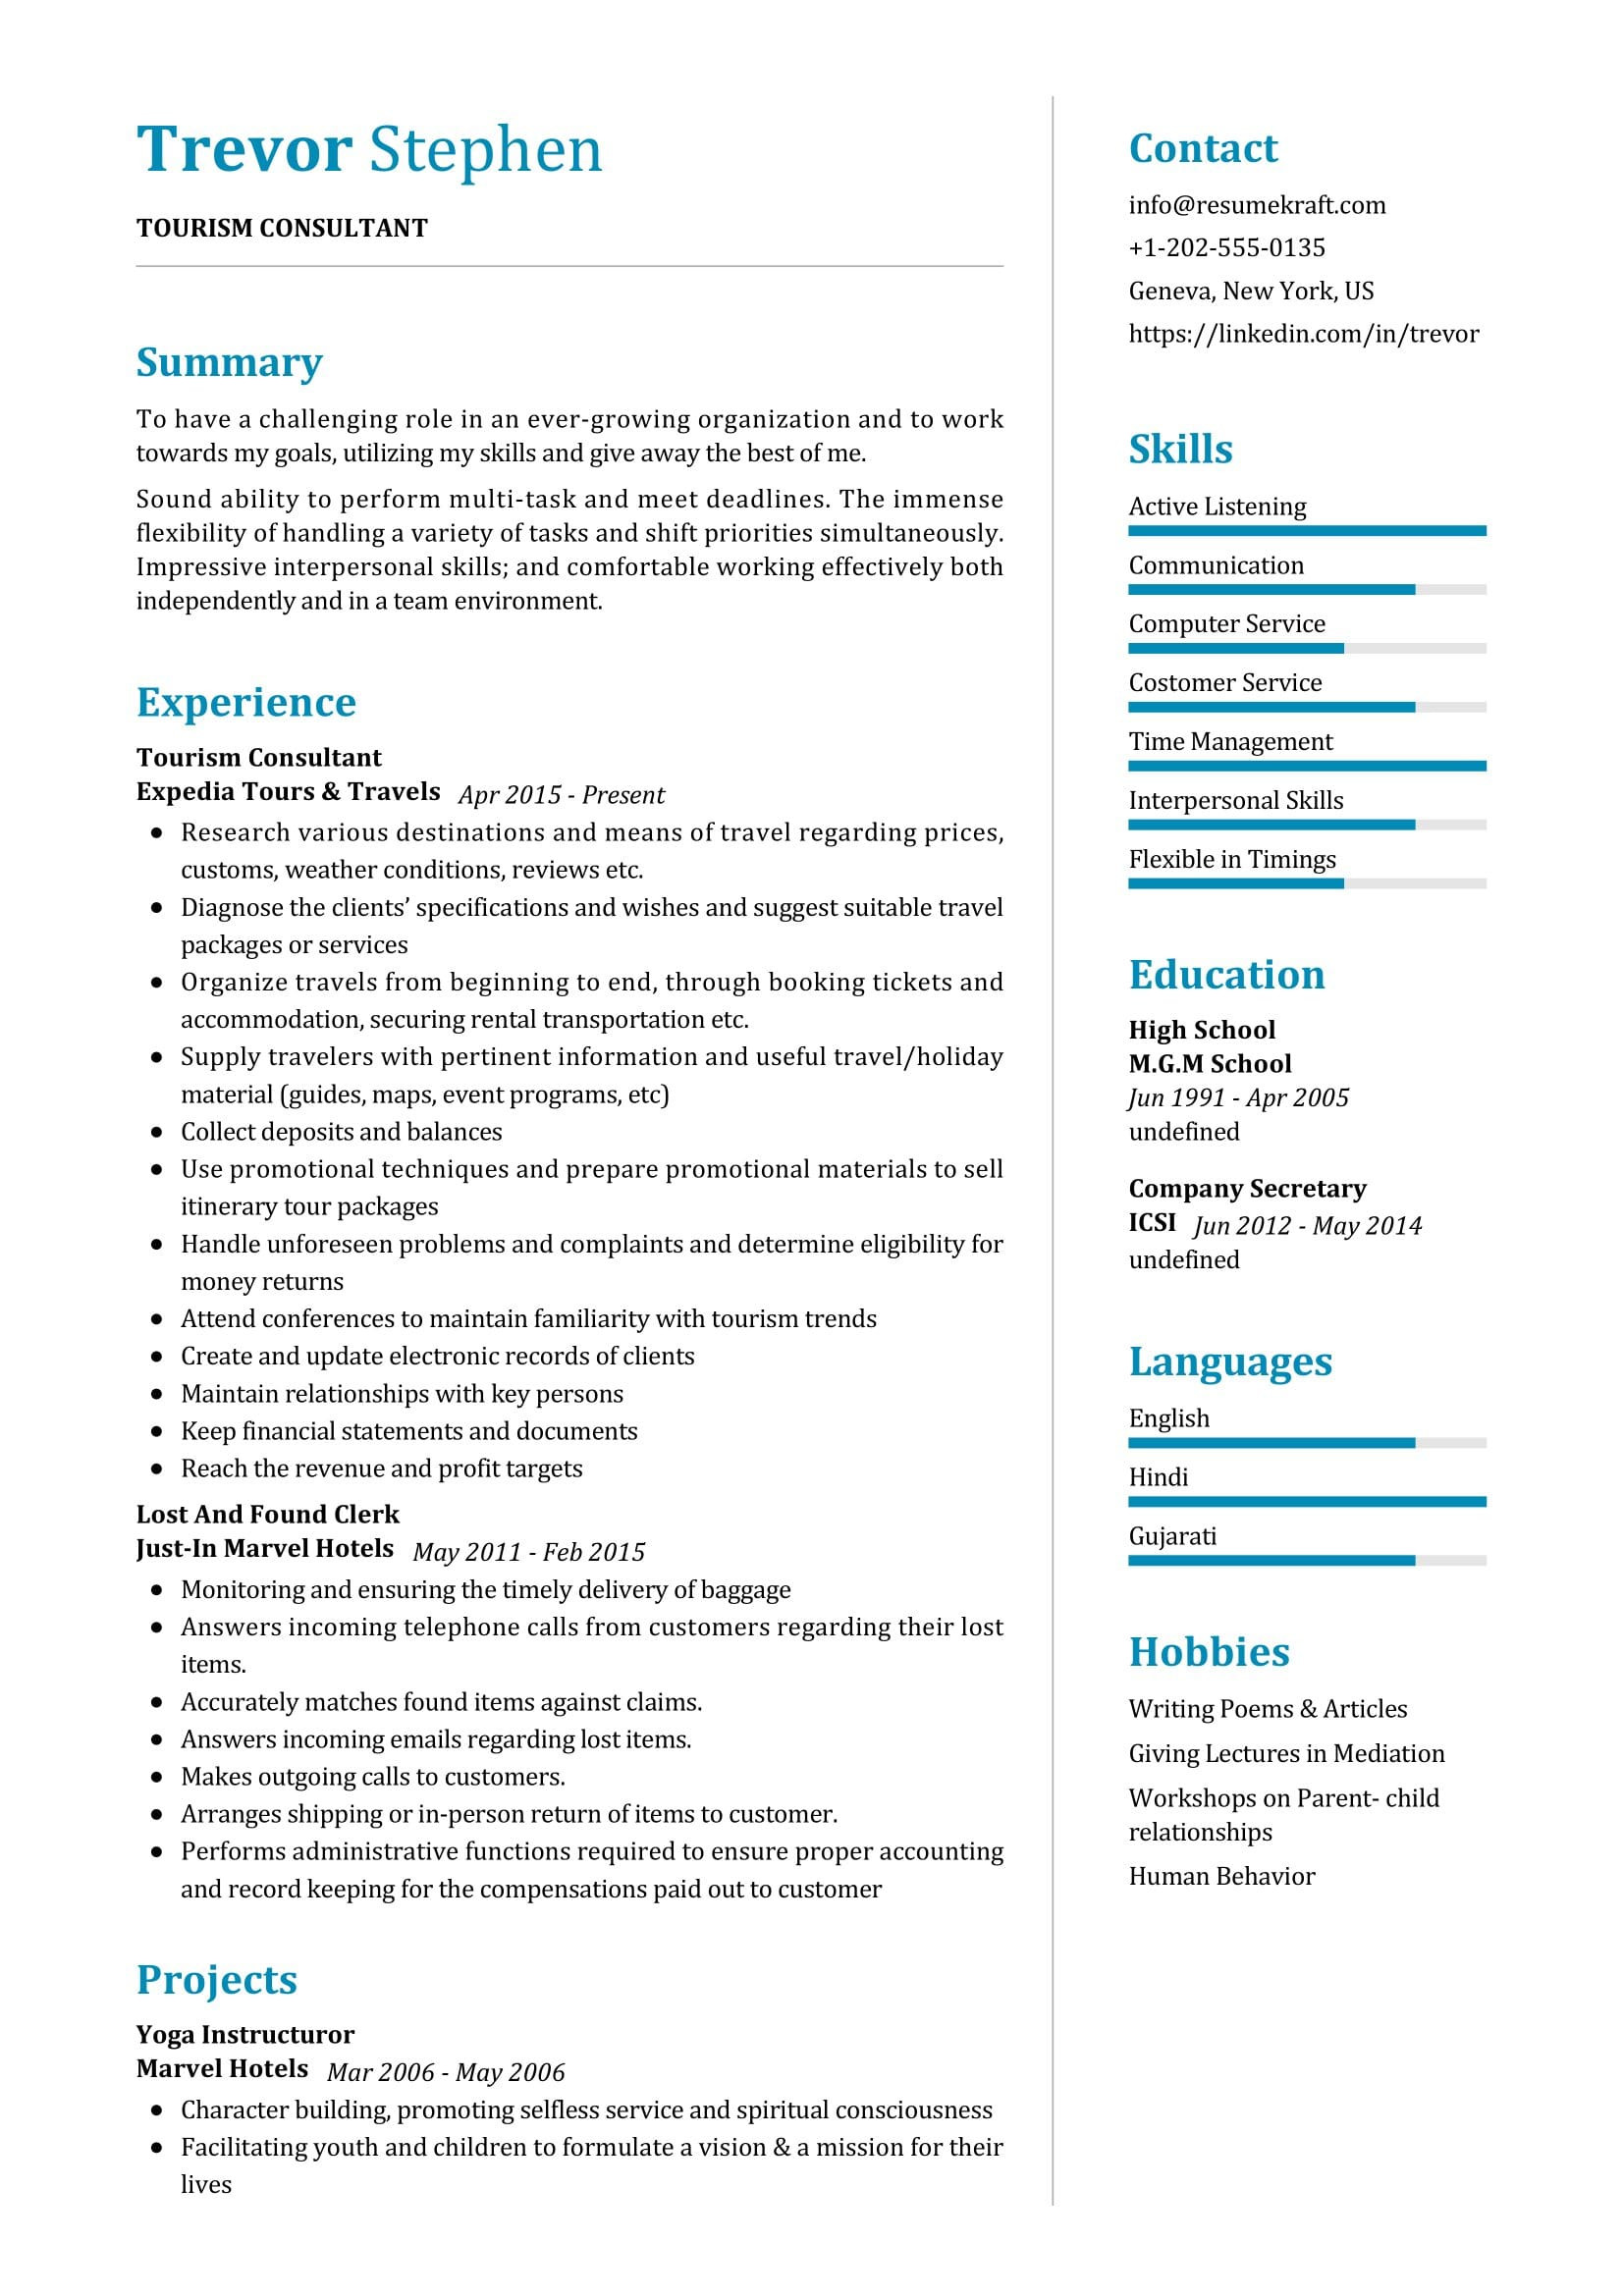 Sample Resume Objective for tourism Students tourism Consultant Resume Sample 2022 Writing Tips – Resumekraft